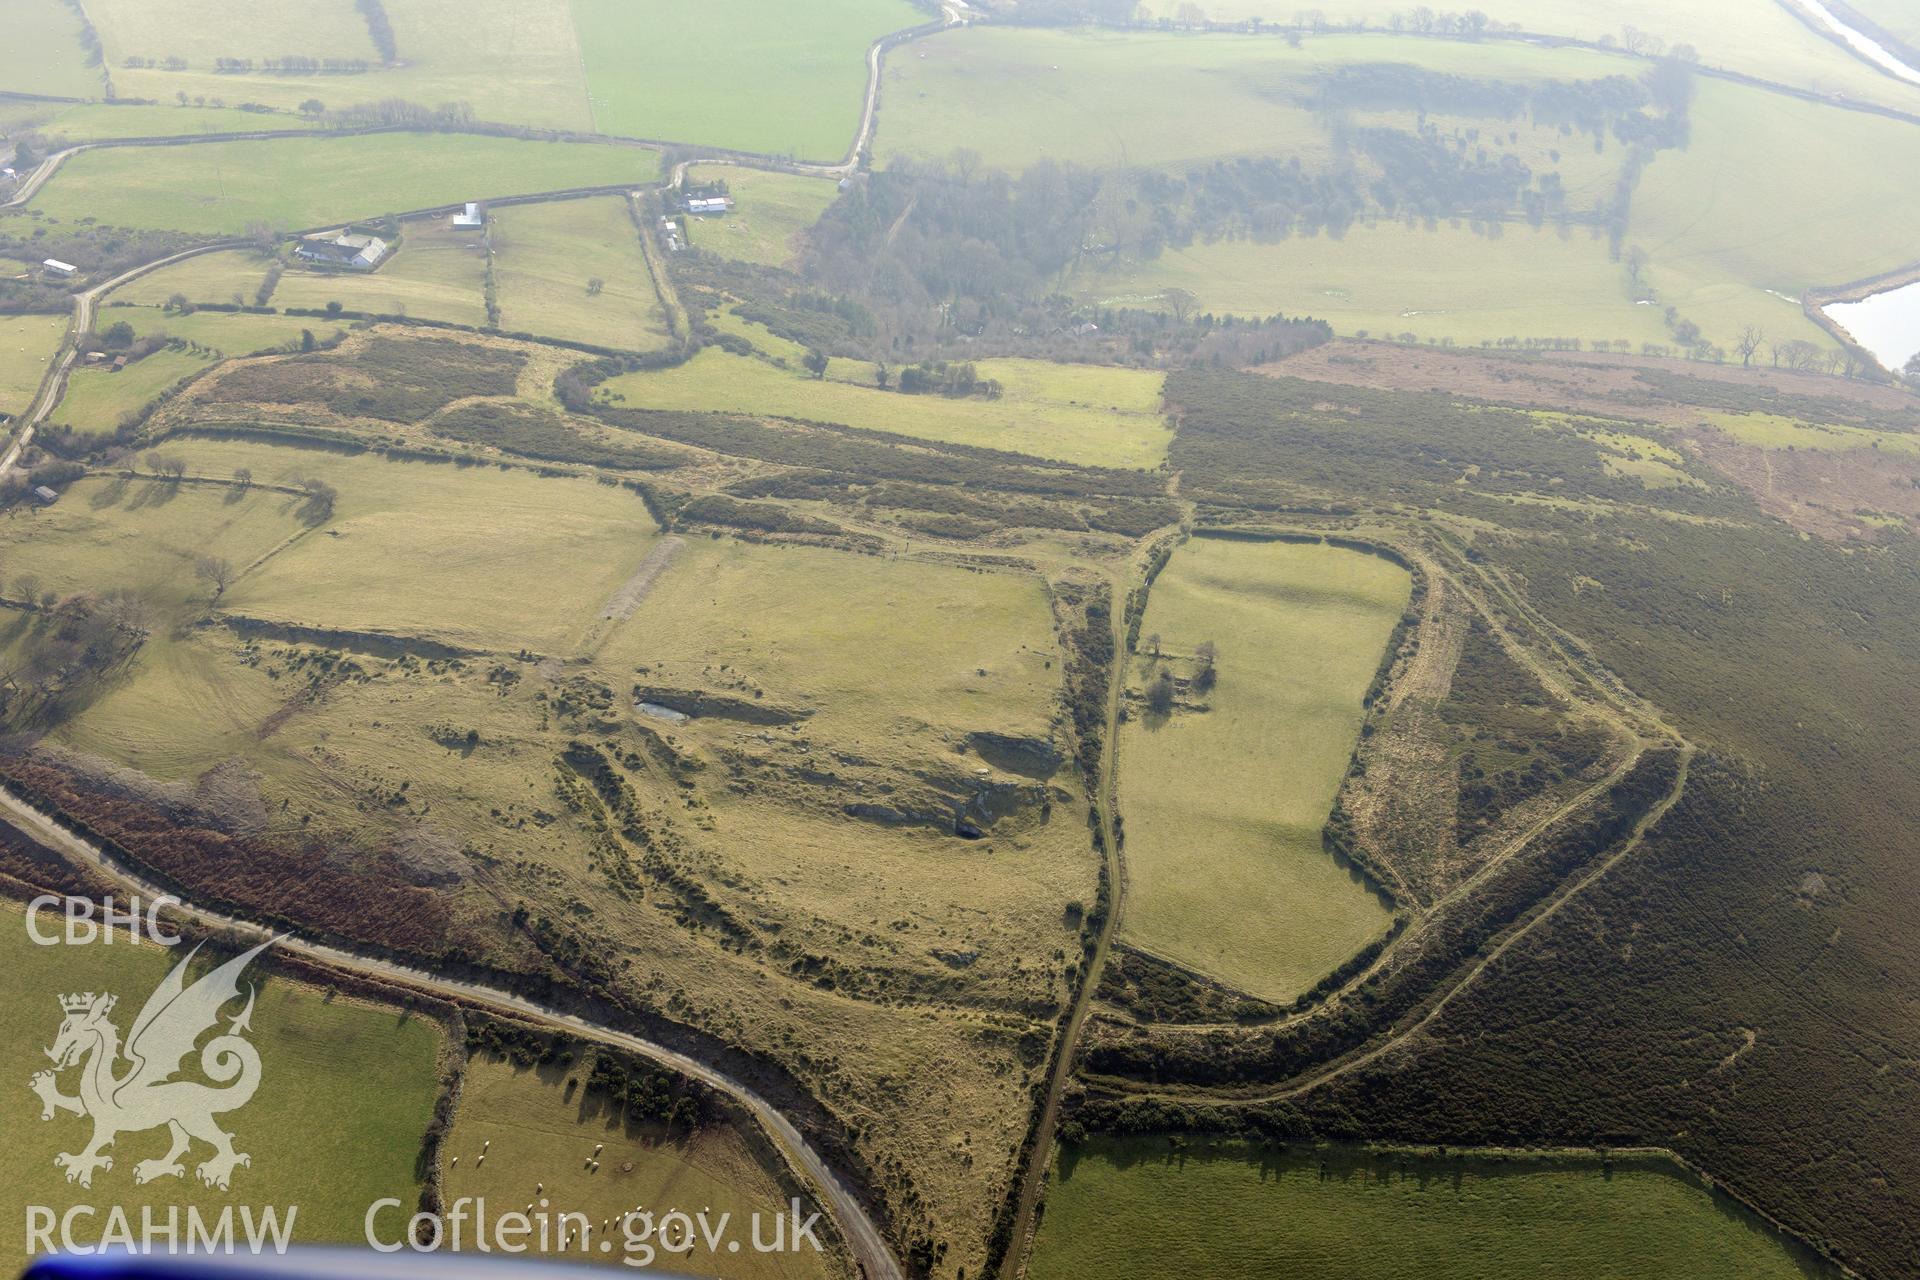 Mynydd-y-Gaer hillfort, Llannefydd, north west of Denbigh. Oblique aerial photograph taken during the Royal Commission?s programme of archaeological aerial reconnaissance by Toby Driver on 28th February 2013.